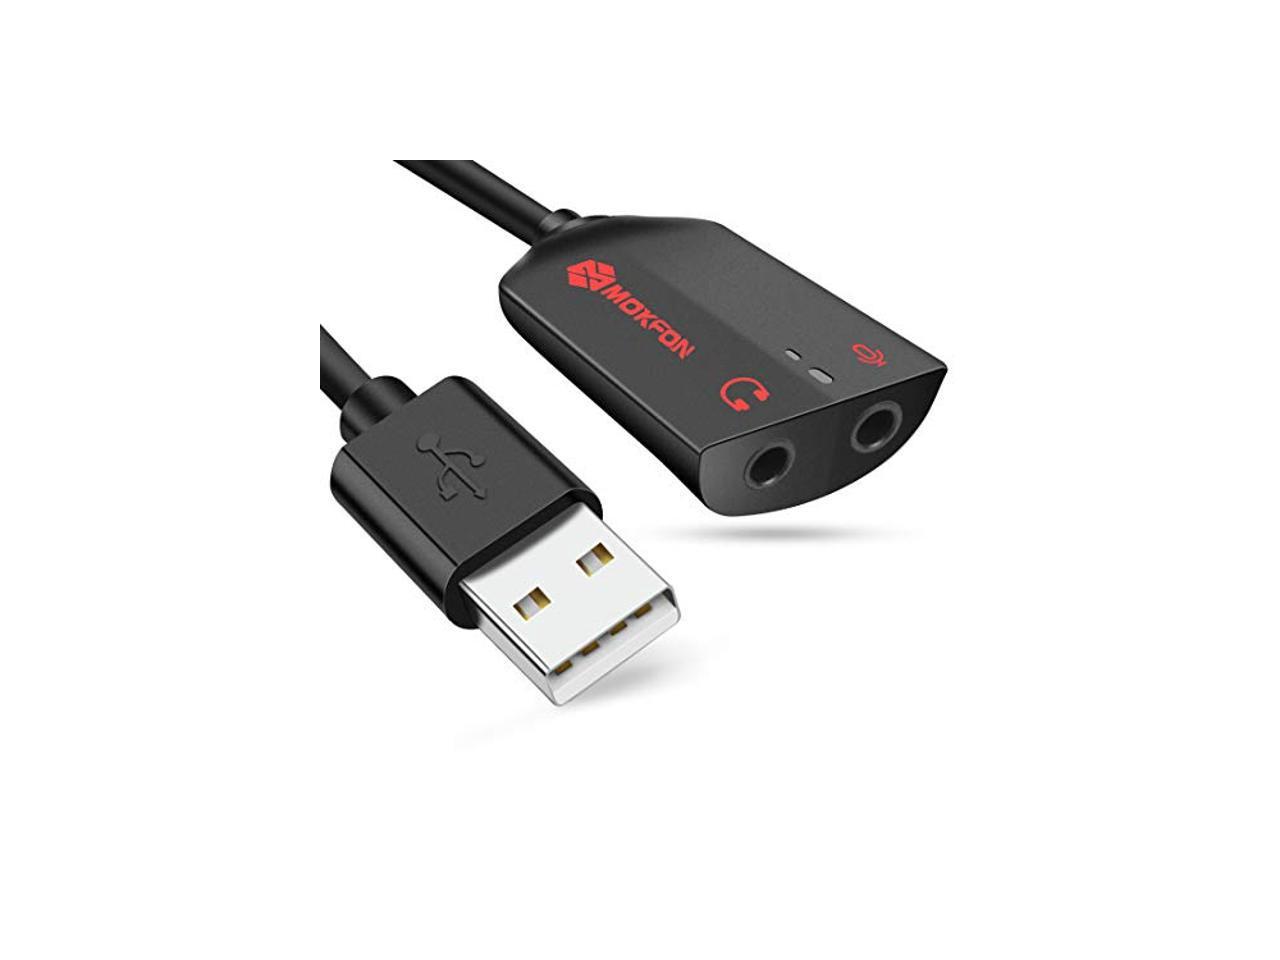 Plug and Play No Drivers Needed Black USB External Stereo Sound Card with 3.5mm Jack Headphone and Microphone for PC,Laptop,Desktop,Switch,PS4,etc MOKFON USB Audio Adapter Support Windows,Mac,Linux 